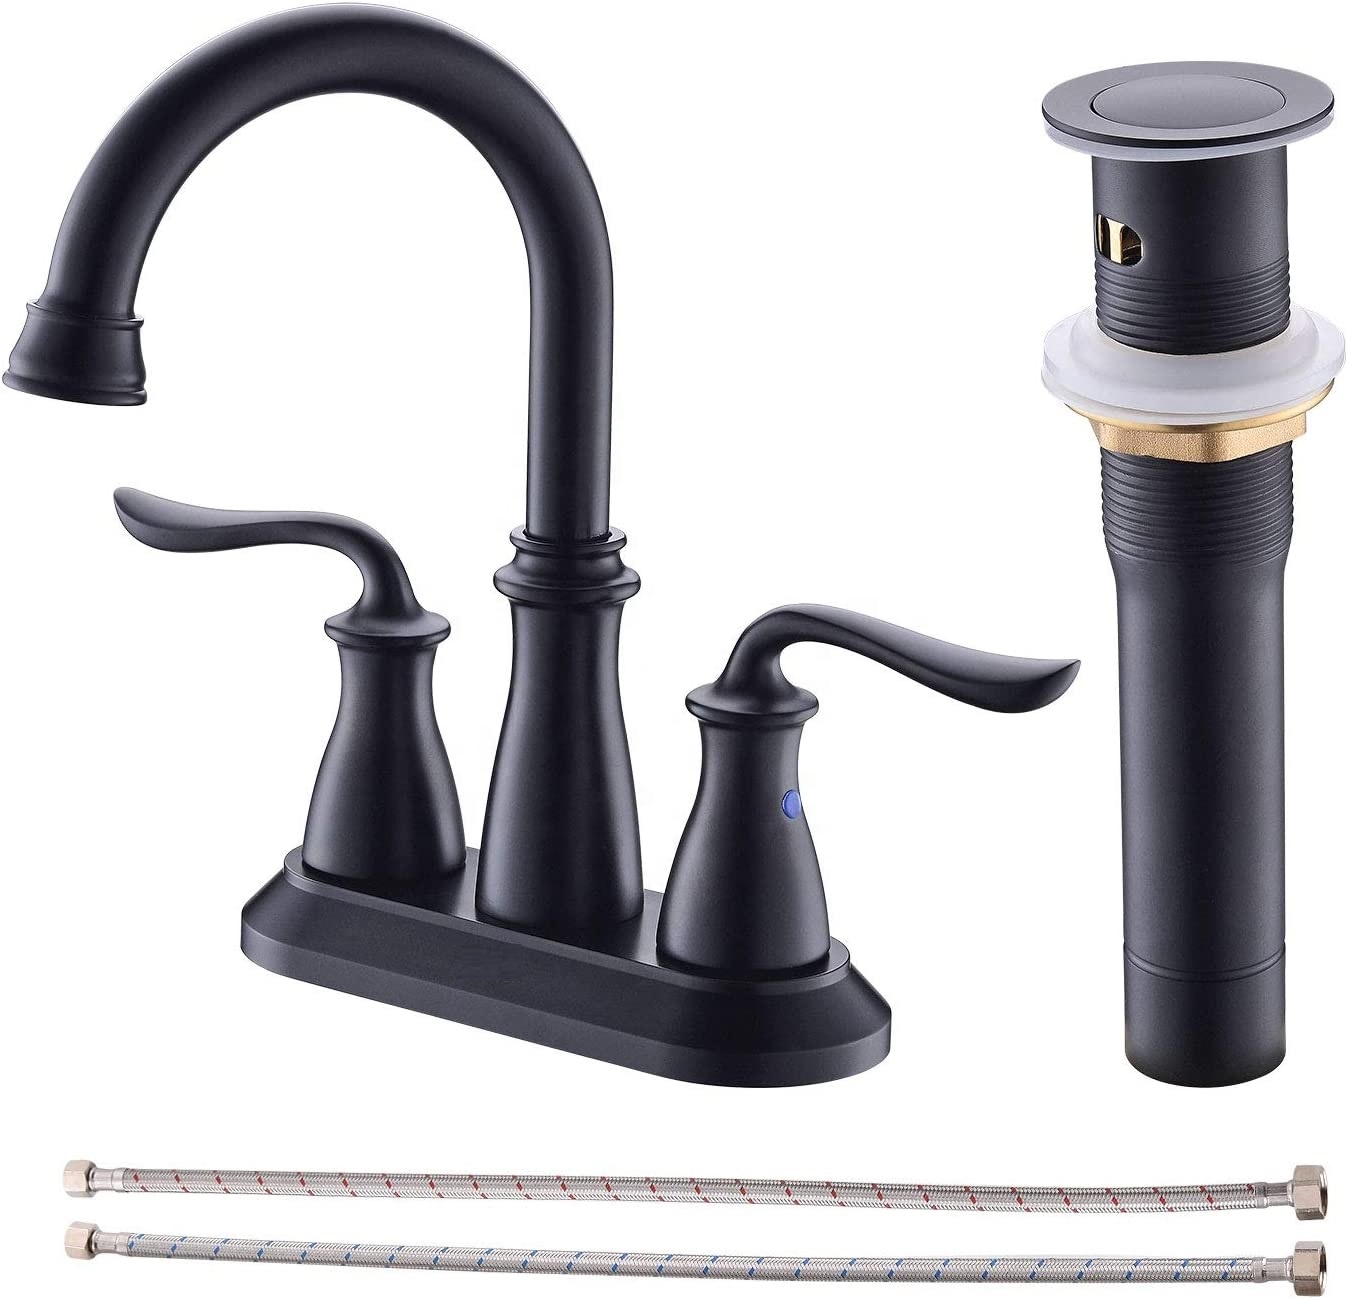 Hot Sale American Classic Water Mixer Three Holes Dural Handles Tap Basin Faucet High Quality